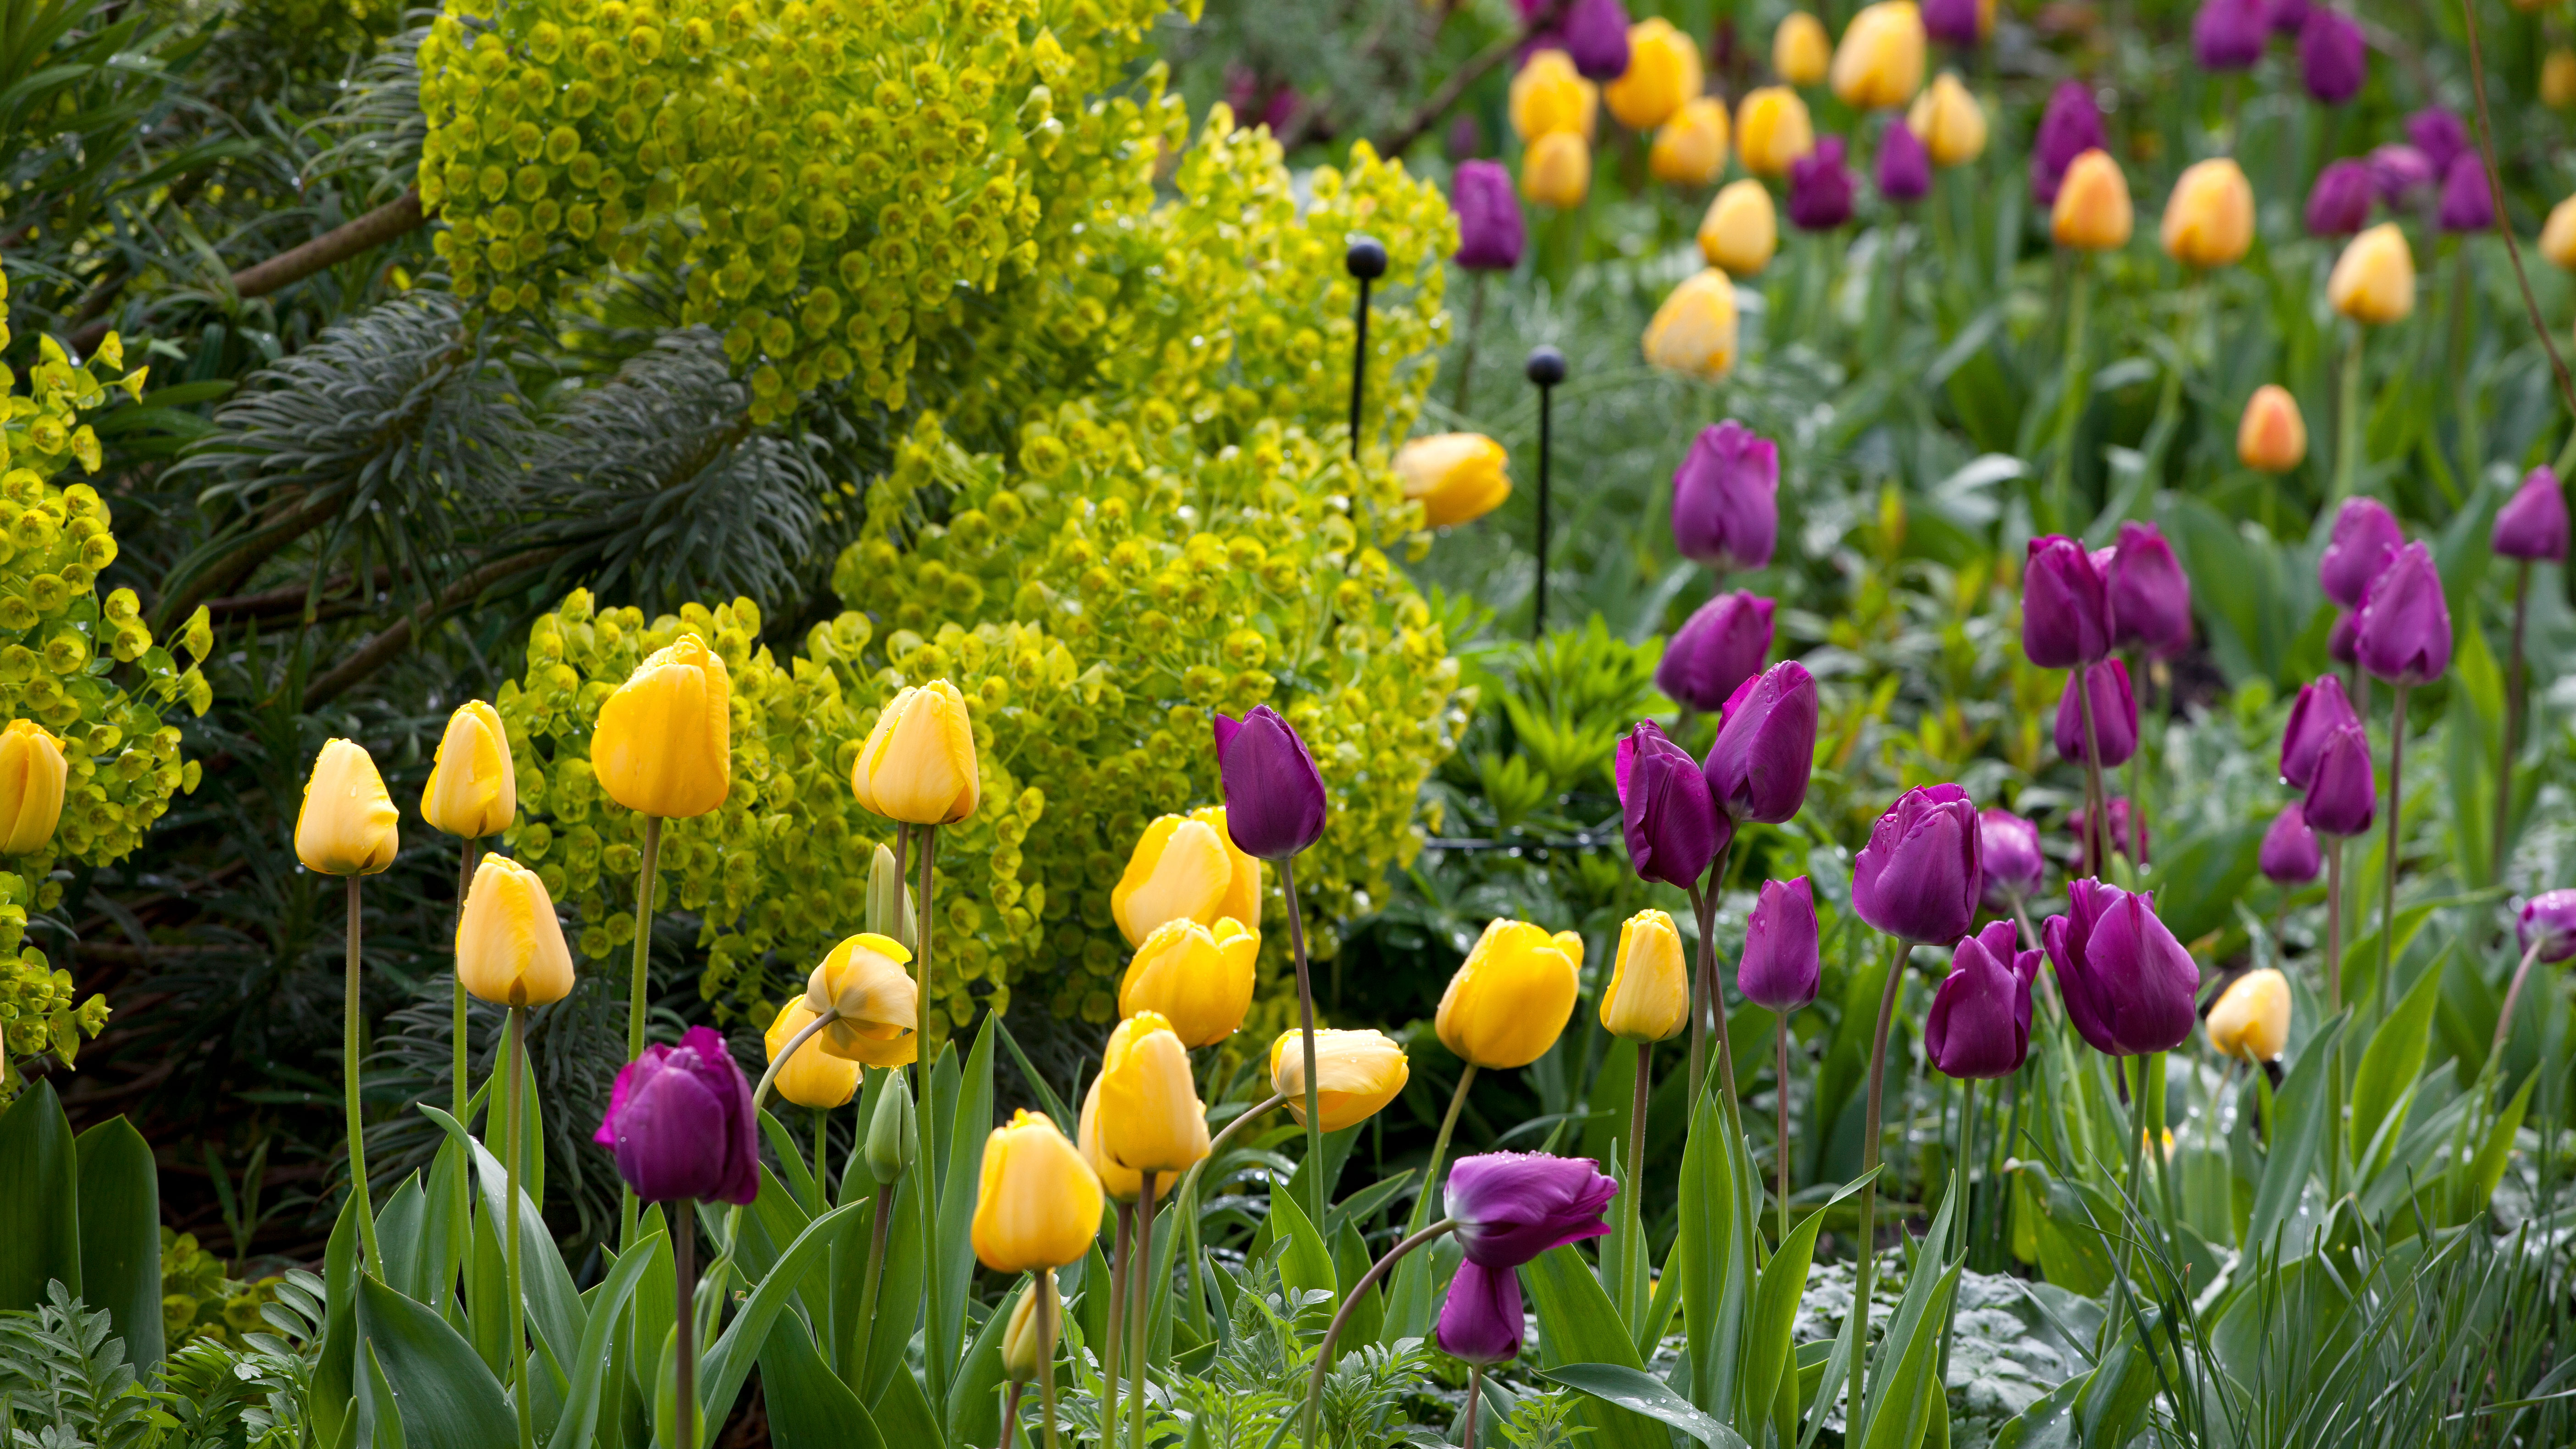 impliciet Klein storting How to plant tulip bulbs: for a display of spring flowers | Homes & Gardens